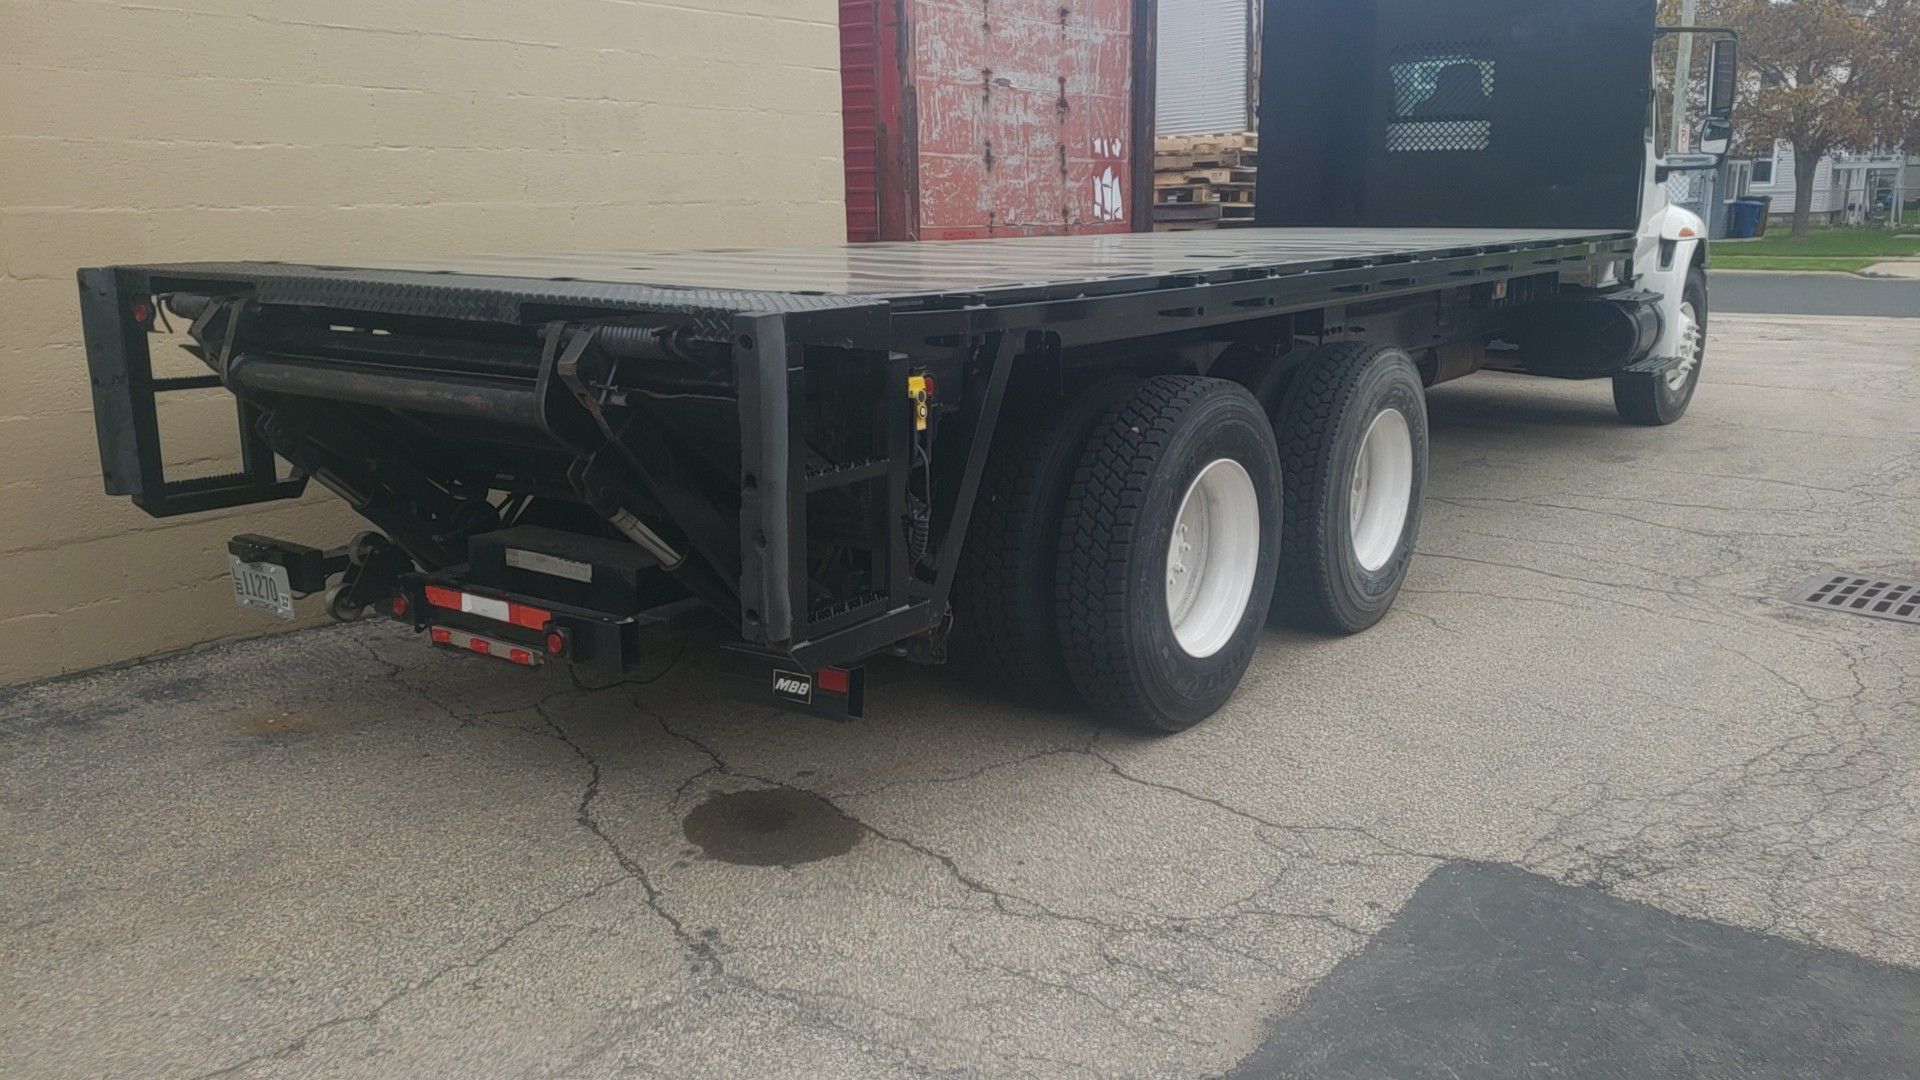 24' x 96" steel flatbed with 3300lb liftgate